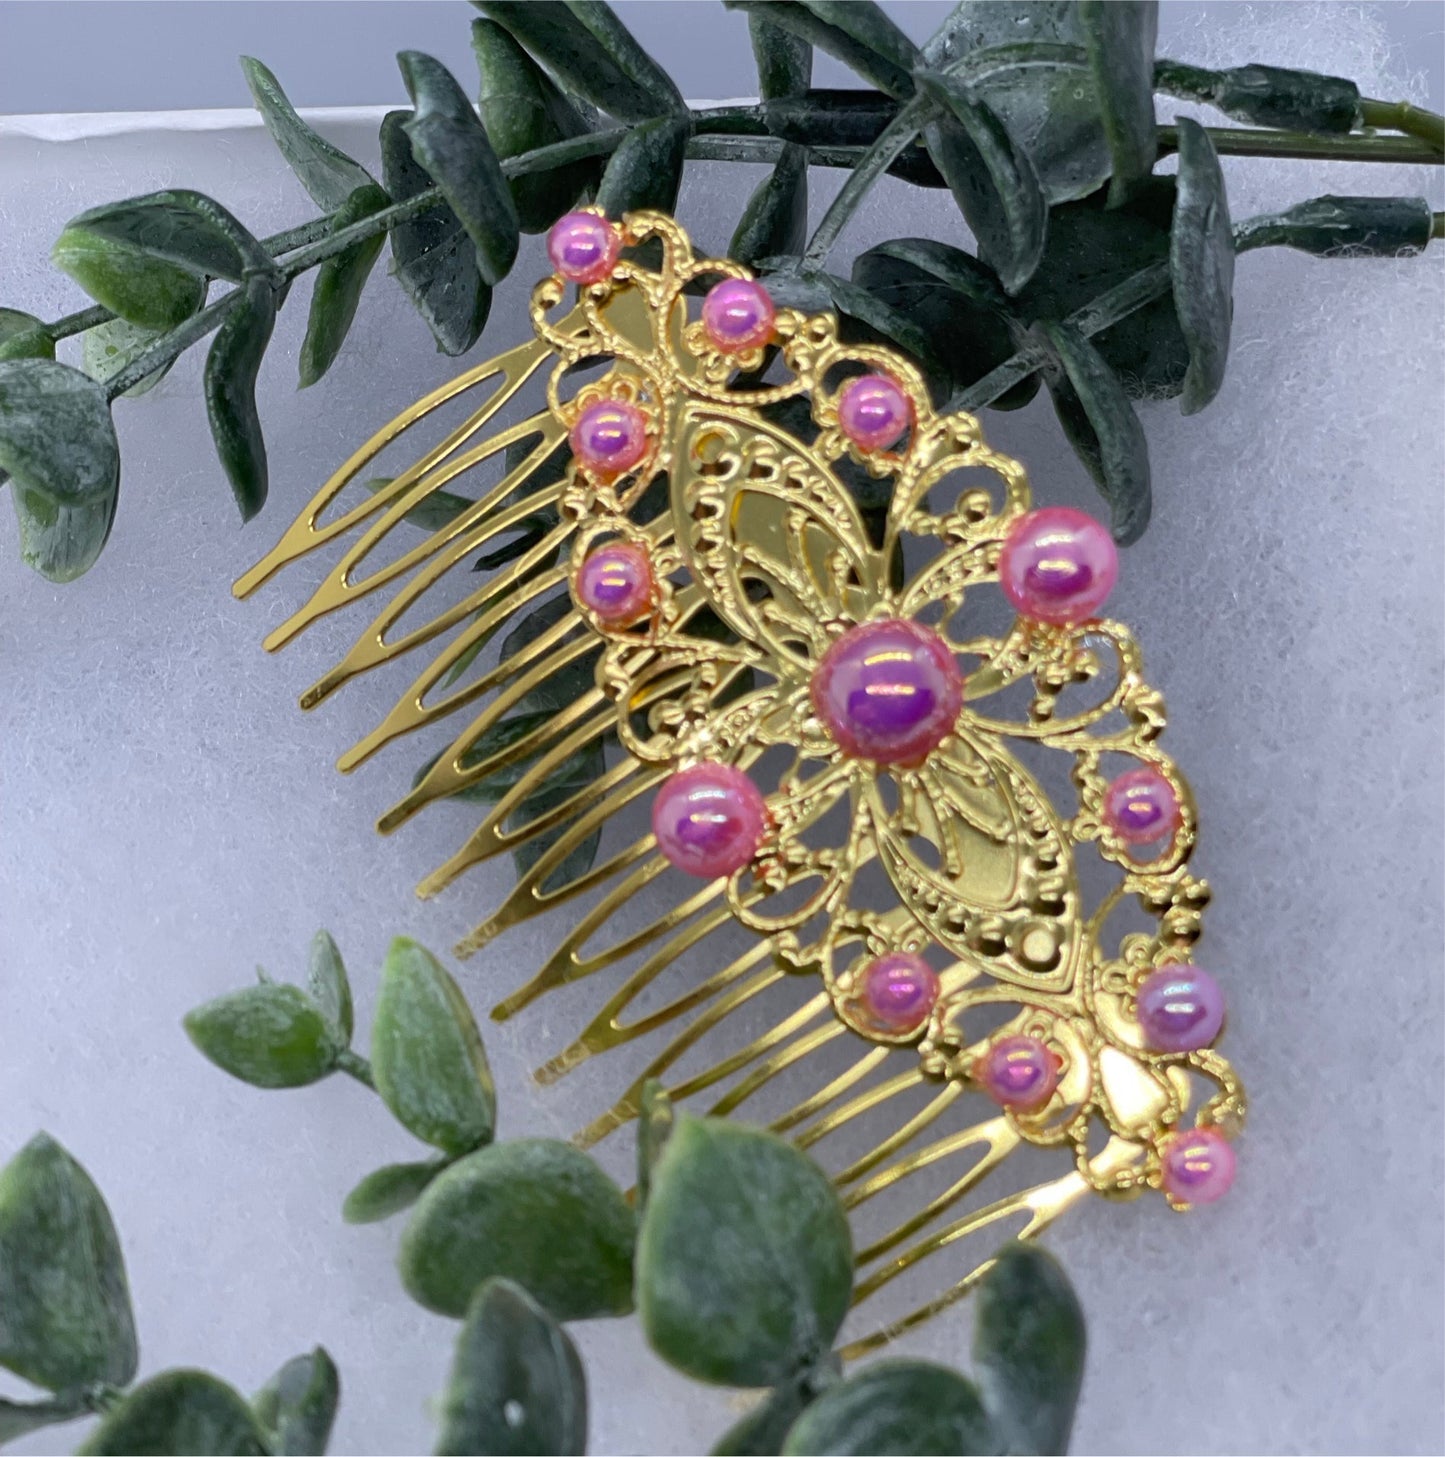 Pink purple  pearls vintage style  Gold  tone side comb hair accessory accessories gift birthday event formal bridesmaid  3.5” Metal side Comb